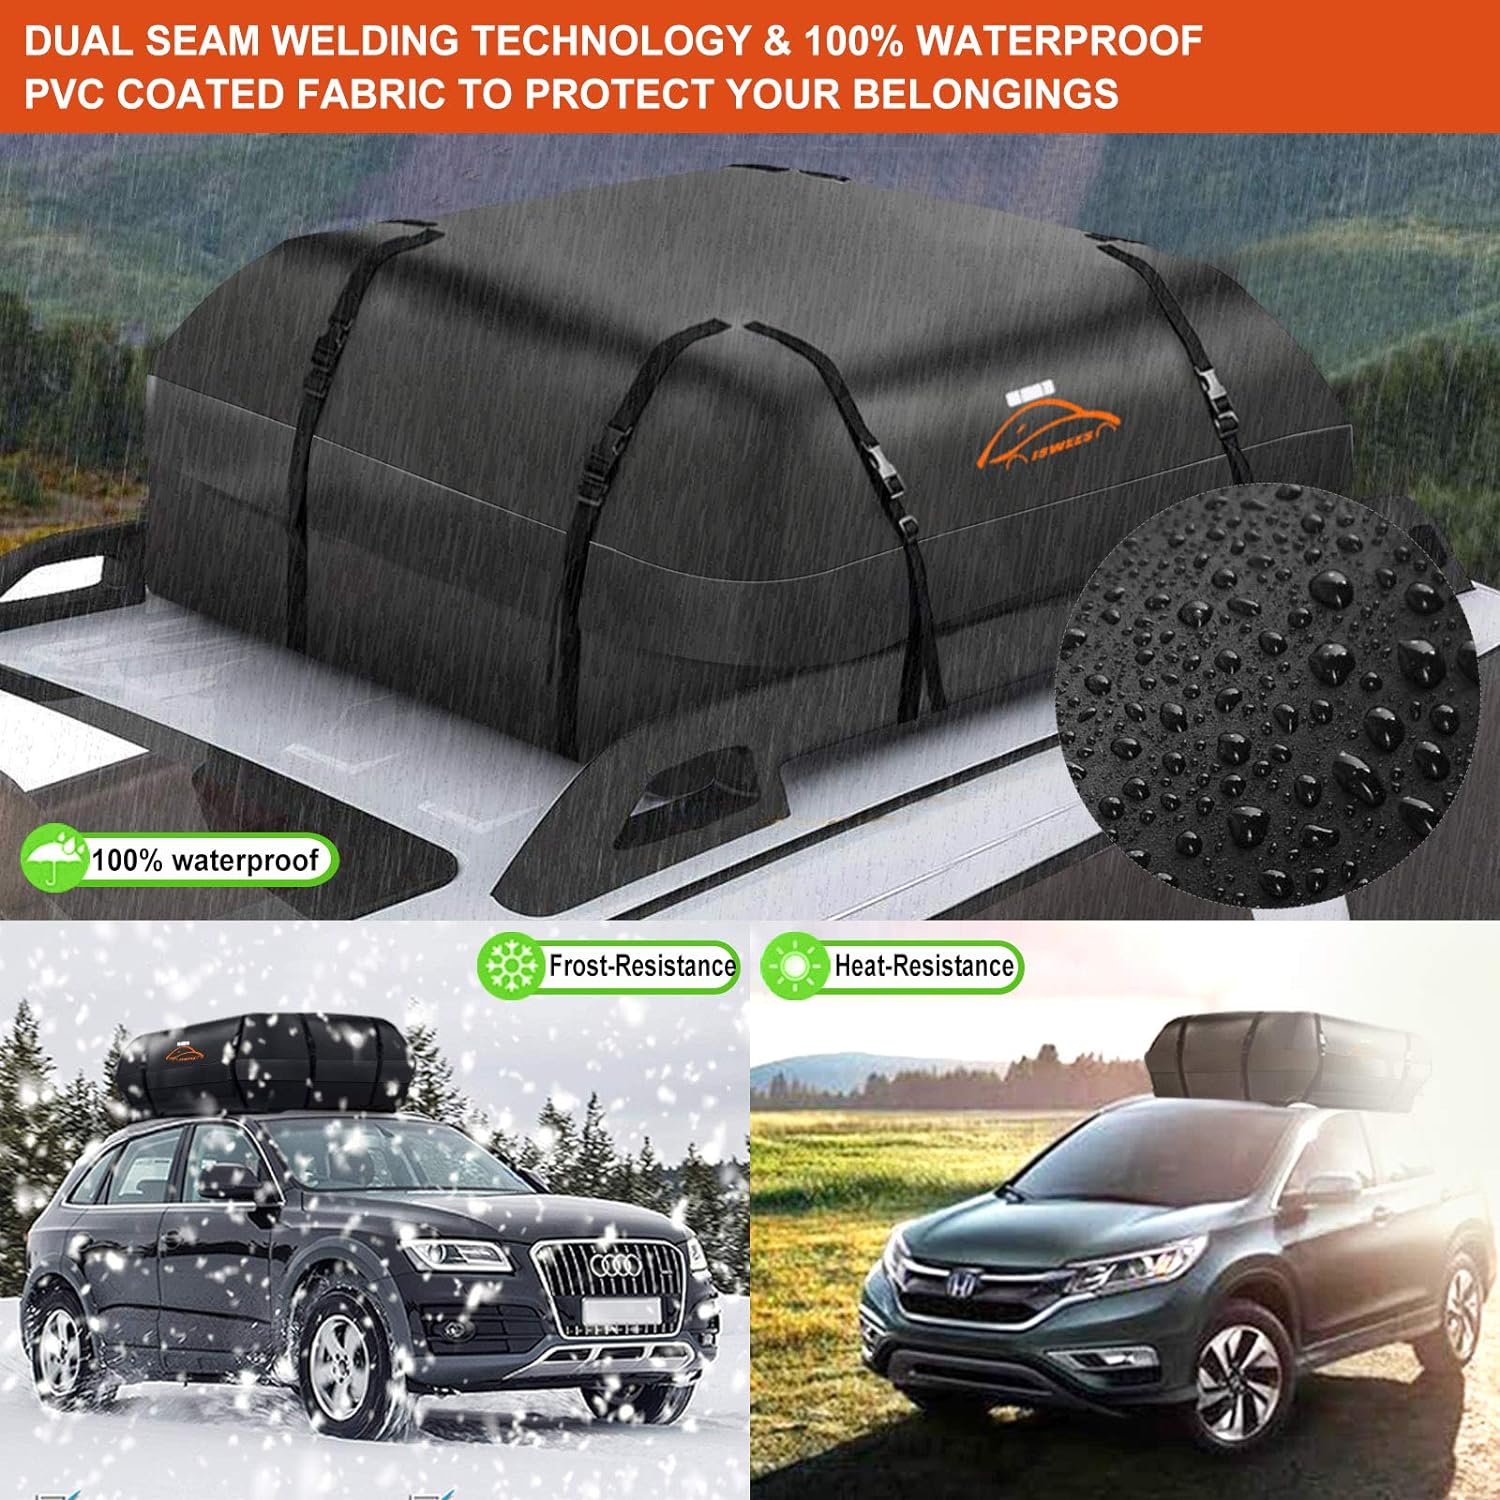 ISWEES Rooftop Cargo Carrier,Car Storage,Roof Rack Cargo Carrier for All Vehicle with/Without Racks , Vehicle Automotive Waterproof ,